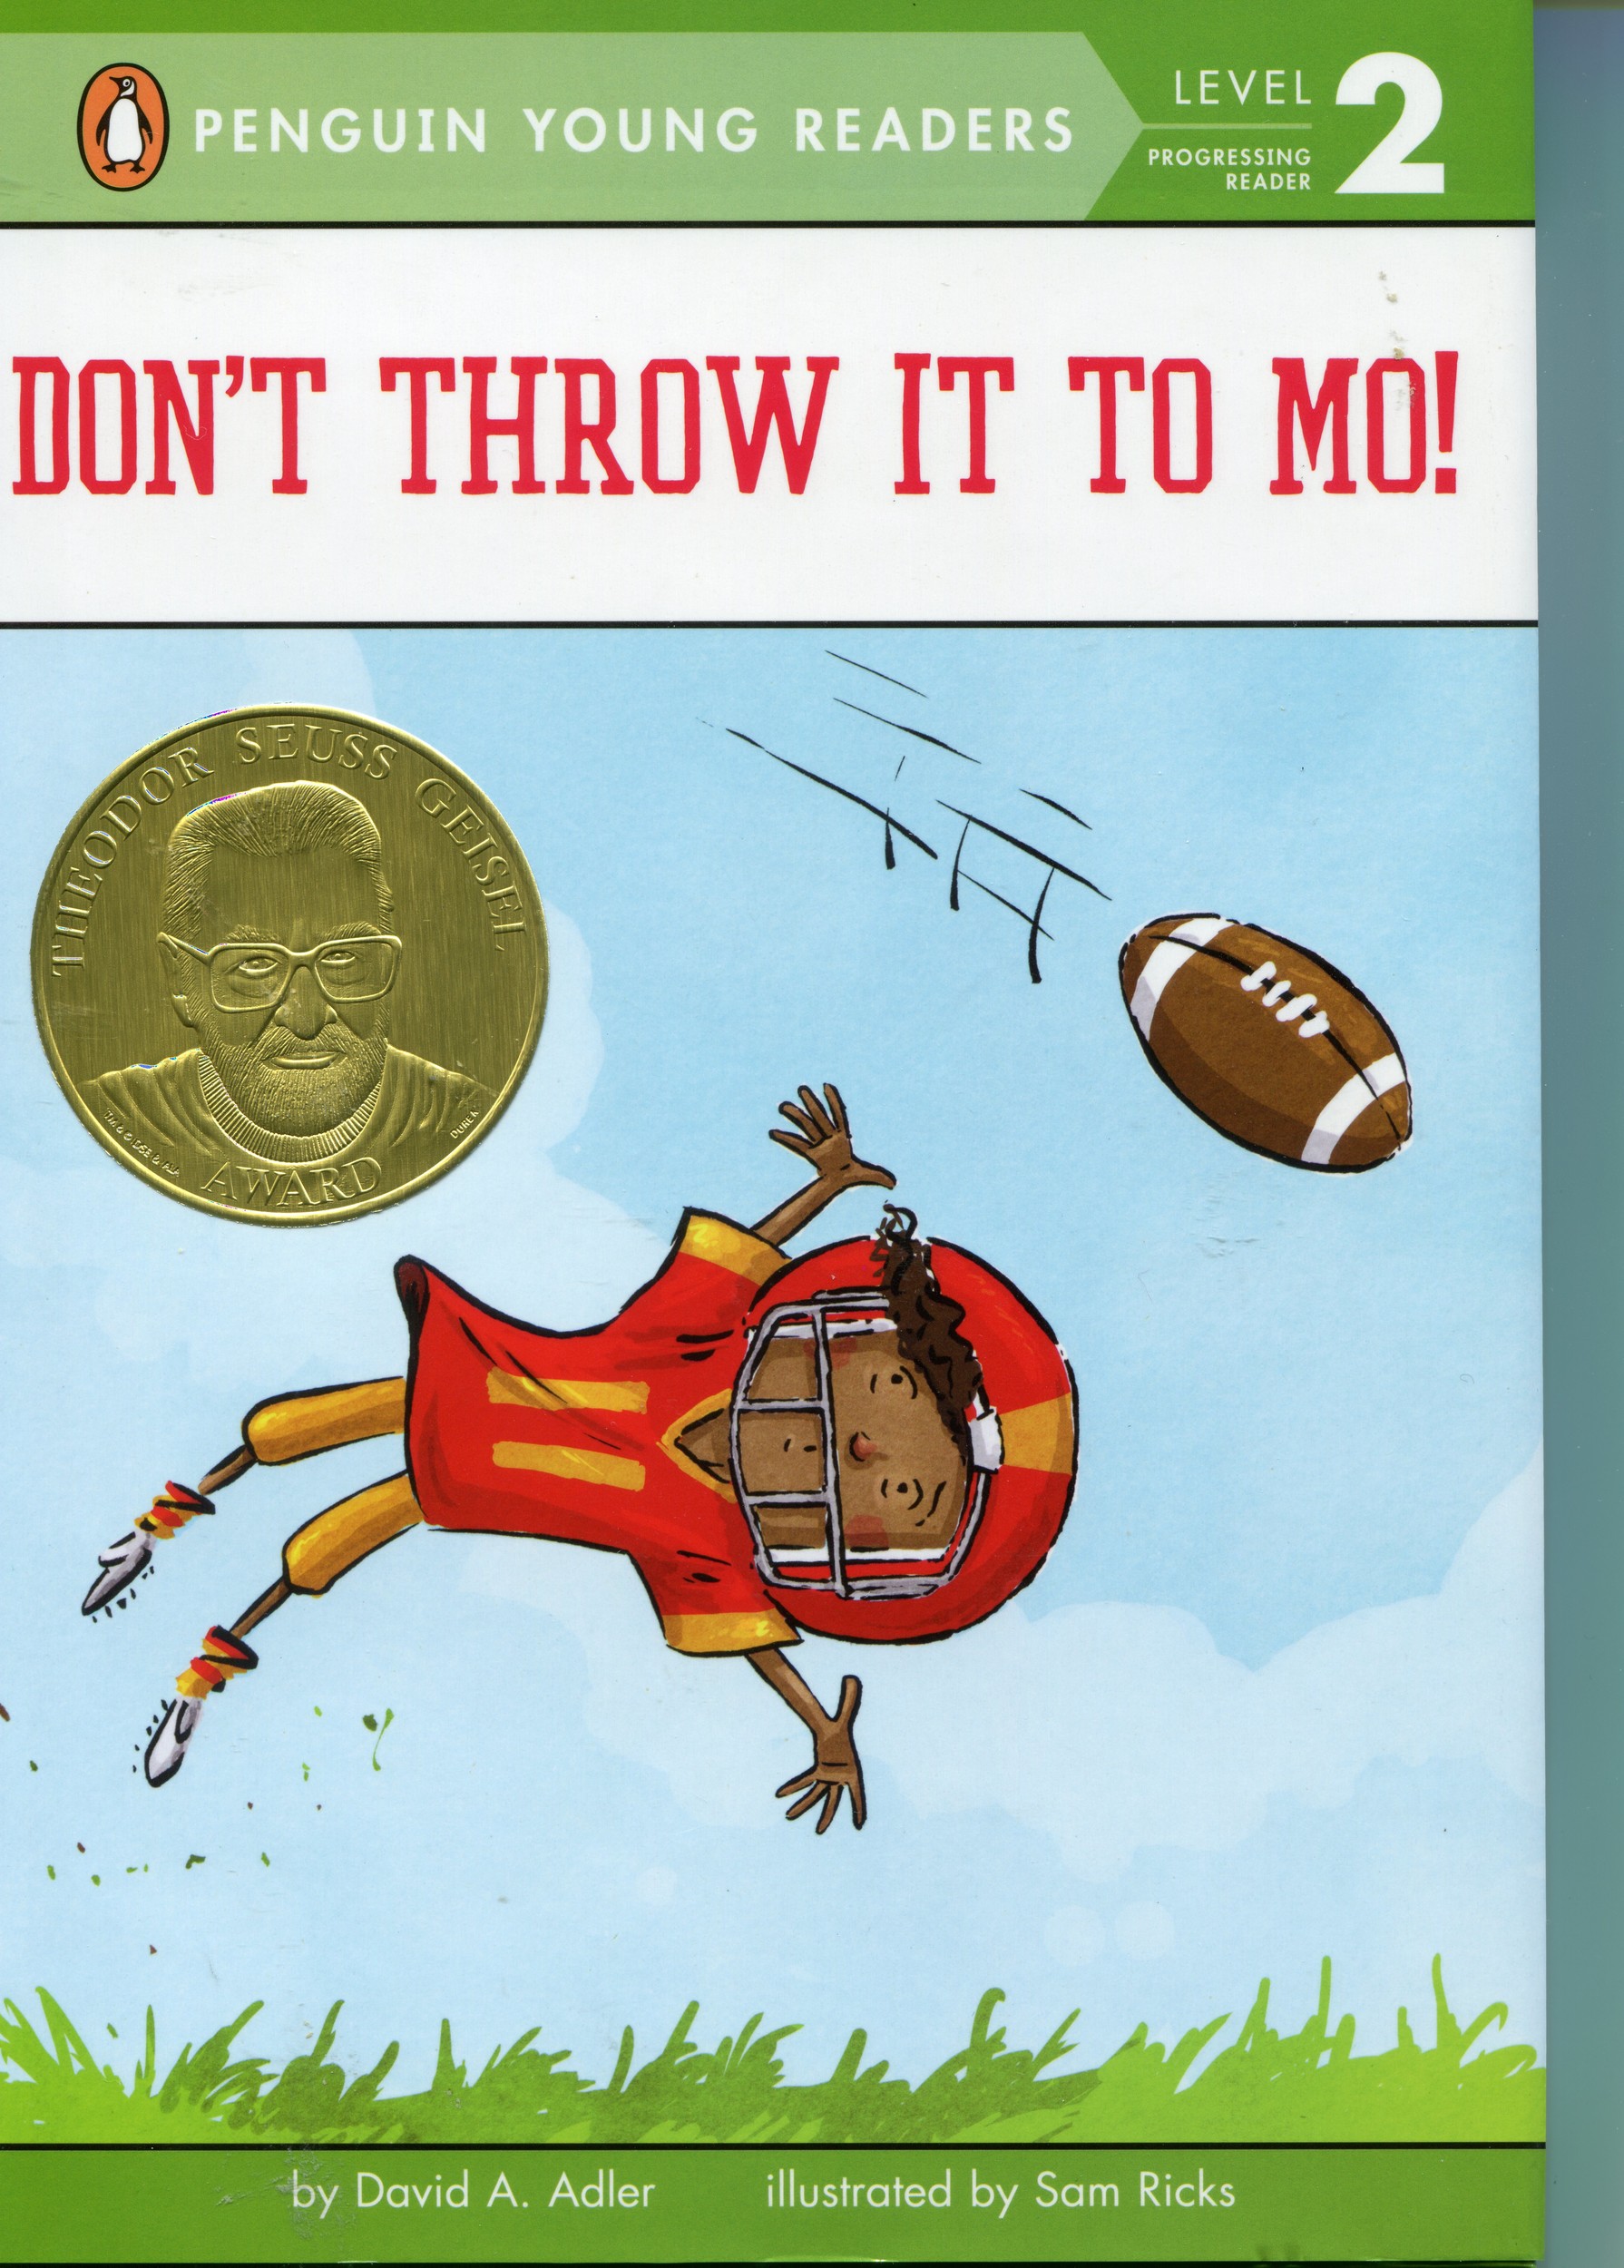 “Don’t Throw It to Mo” is the first in a new series of children’s books written by Woodmere resident David A. Adler.